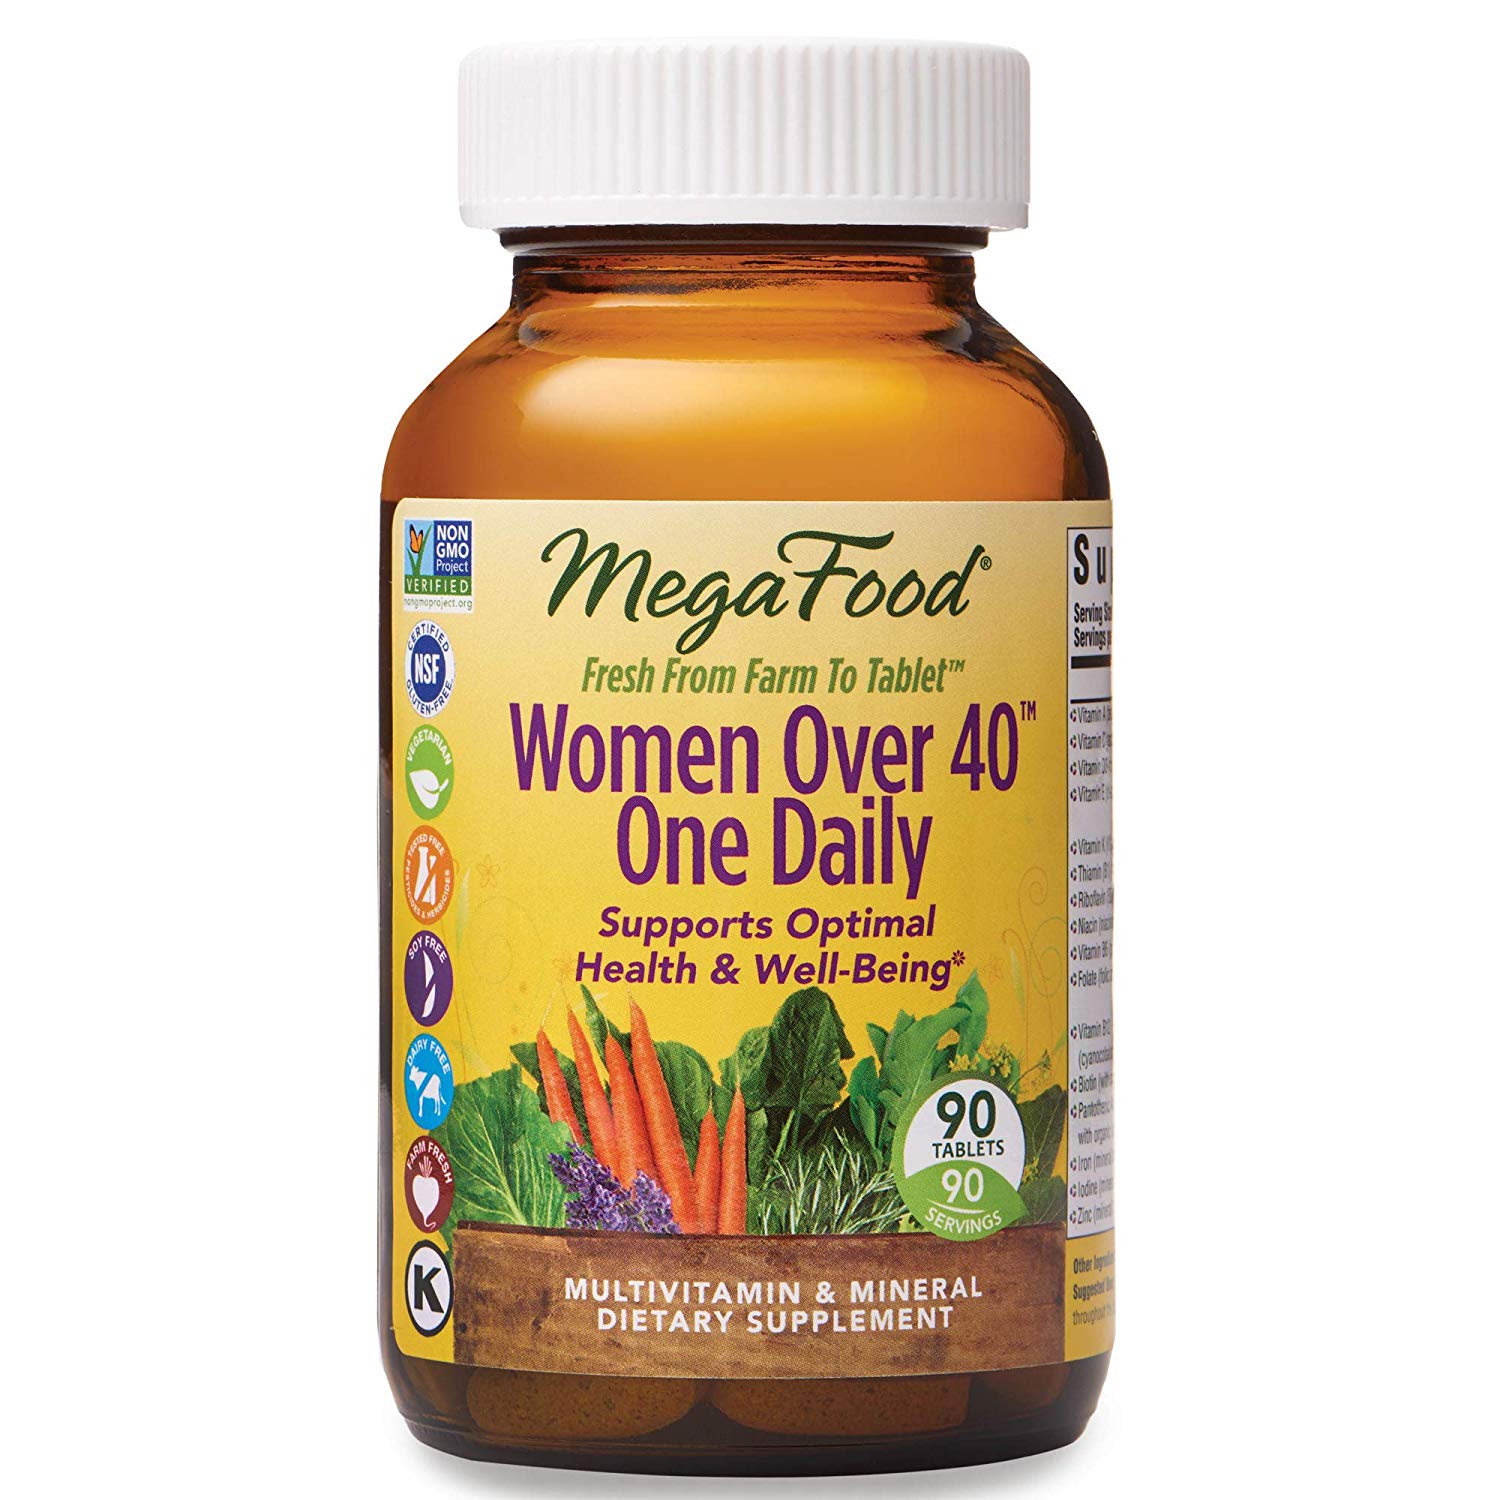 10 Best Multivitamins For Women Over 40, 50 (A Research ...